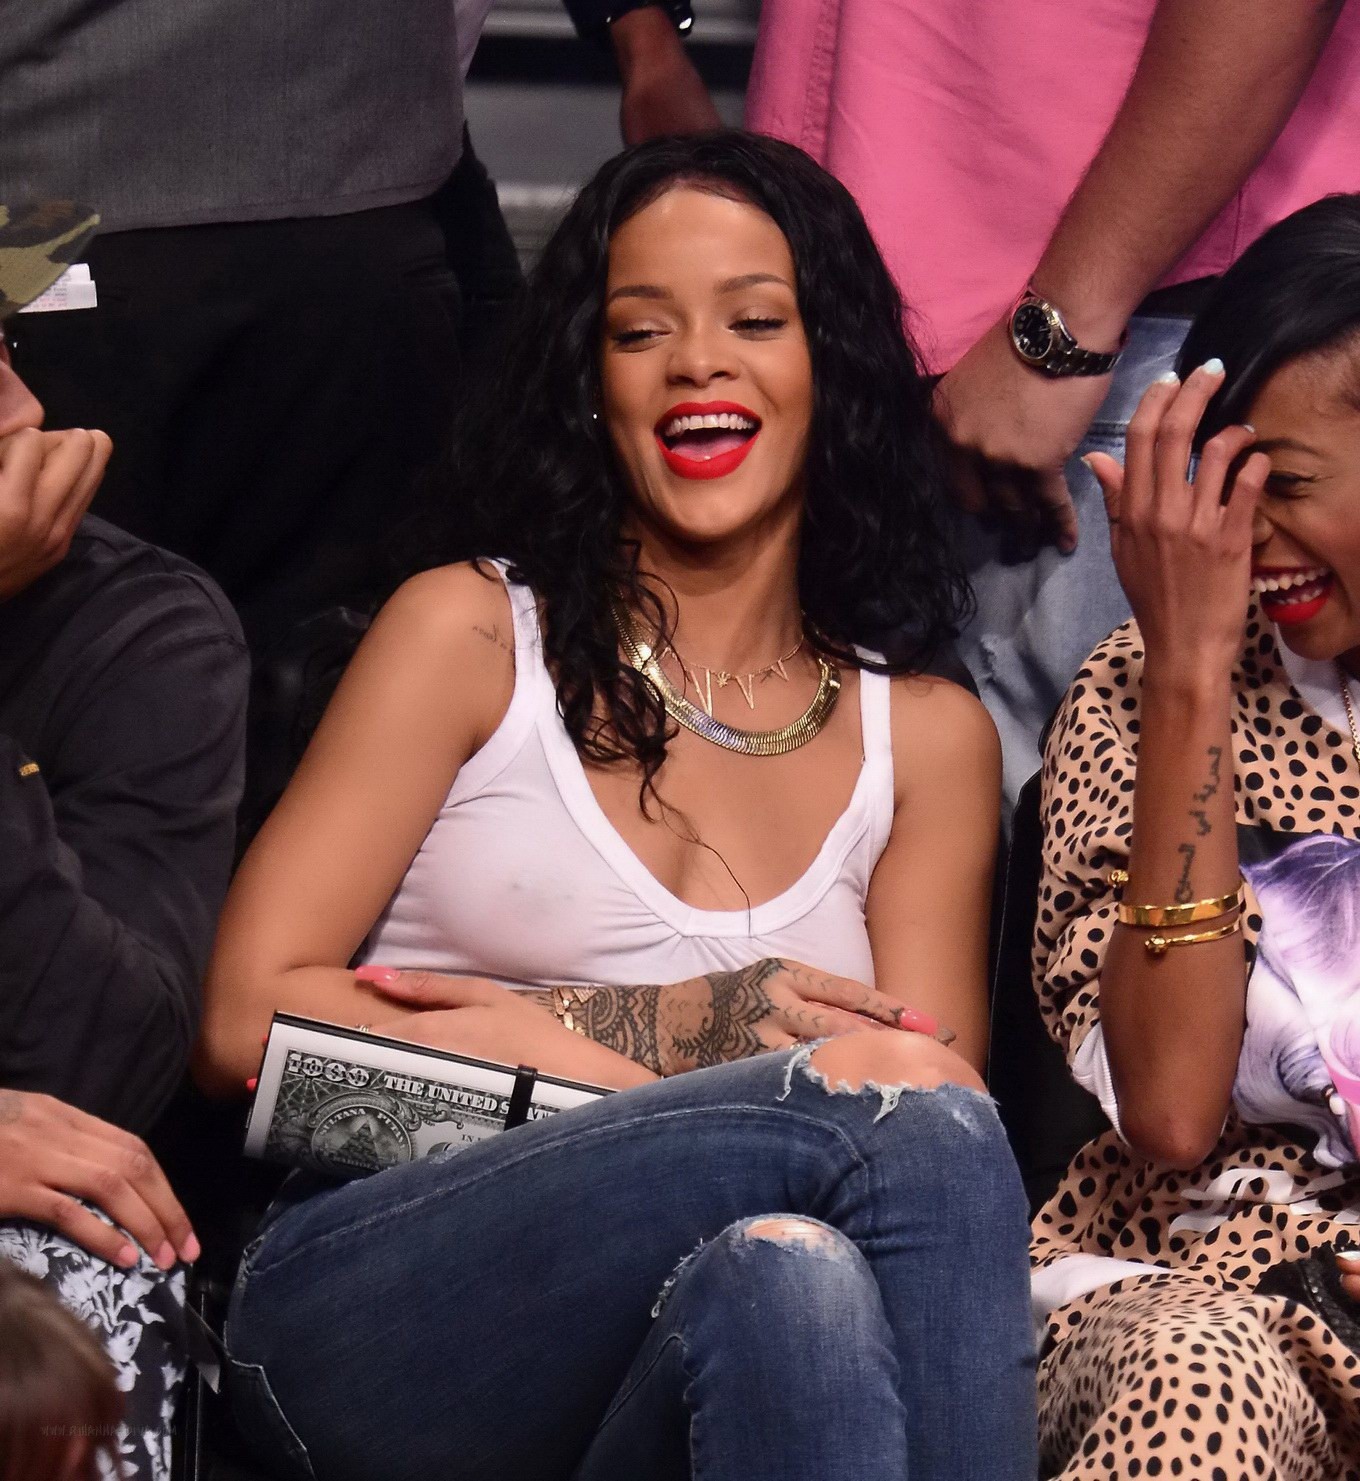 Rihanna shows off her boobs in seethru top at a basketball game in NYC #75198154